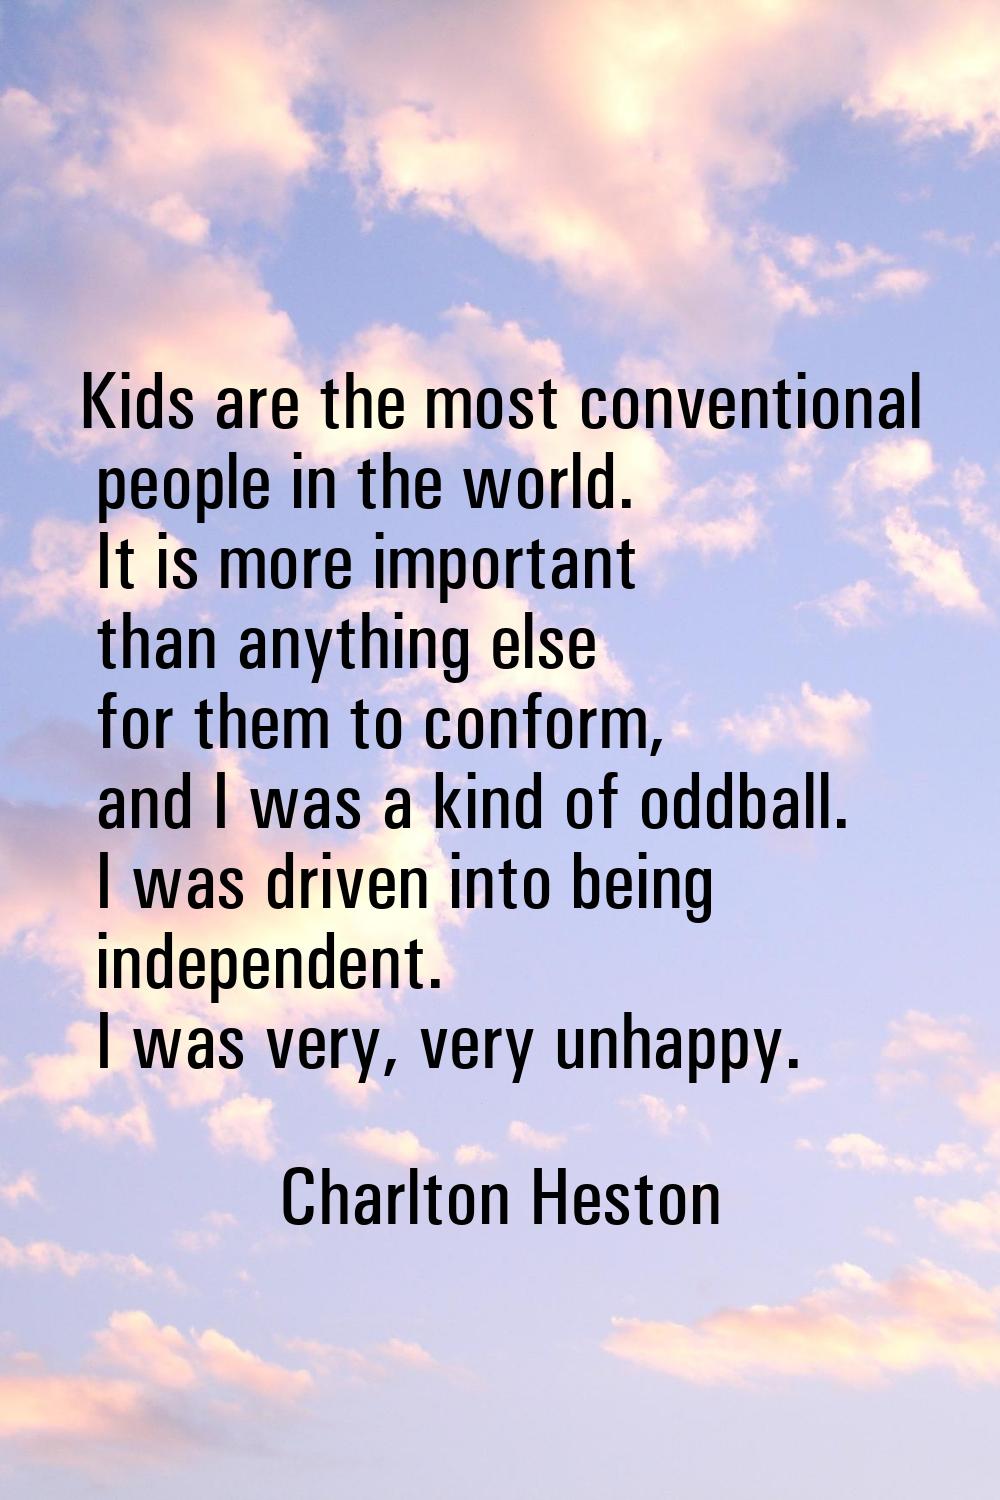 Kids are the most conventional people in the world. It is more important than anything else for the